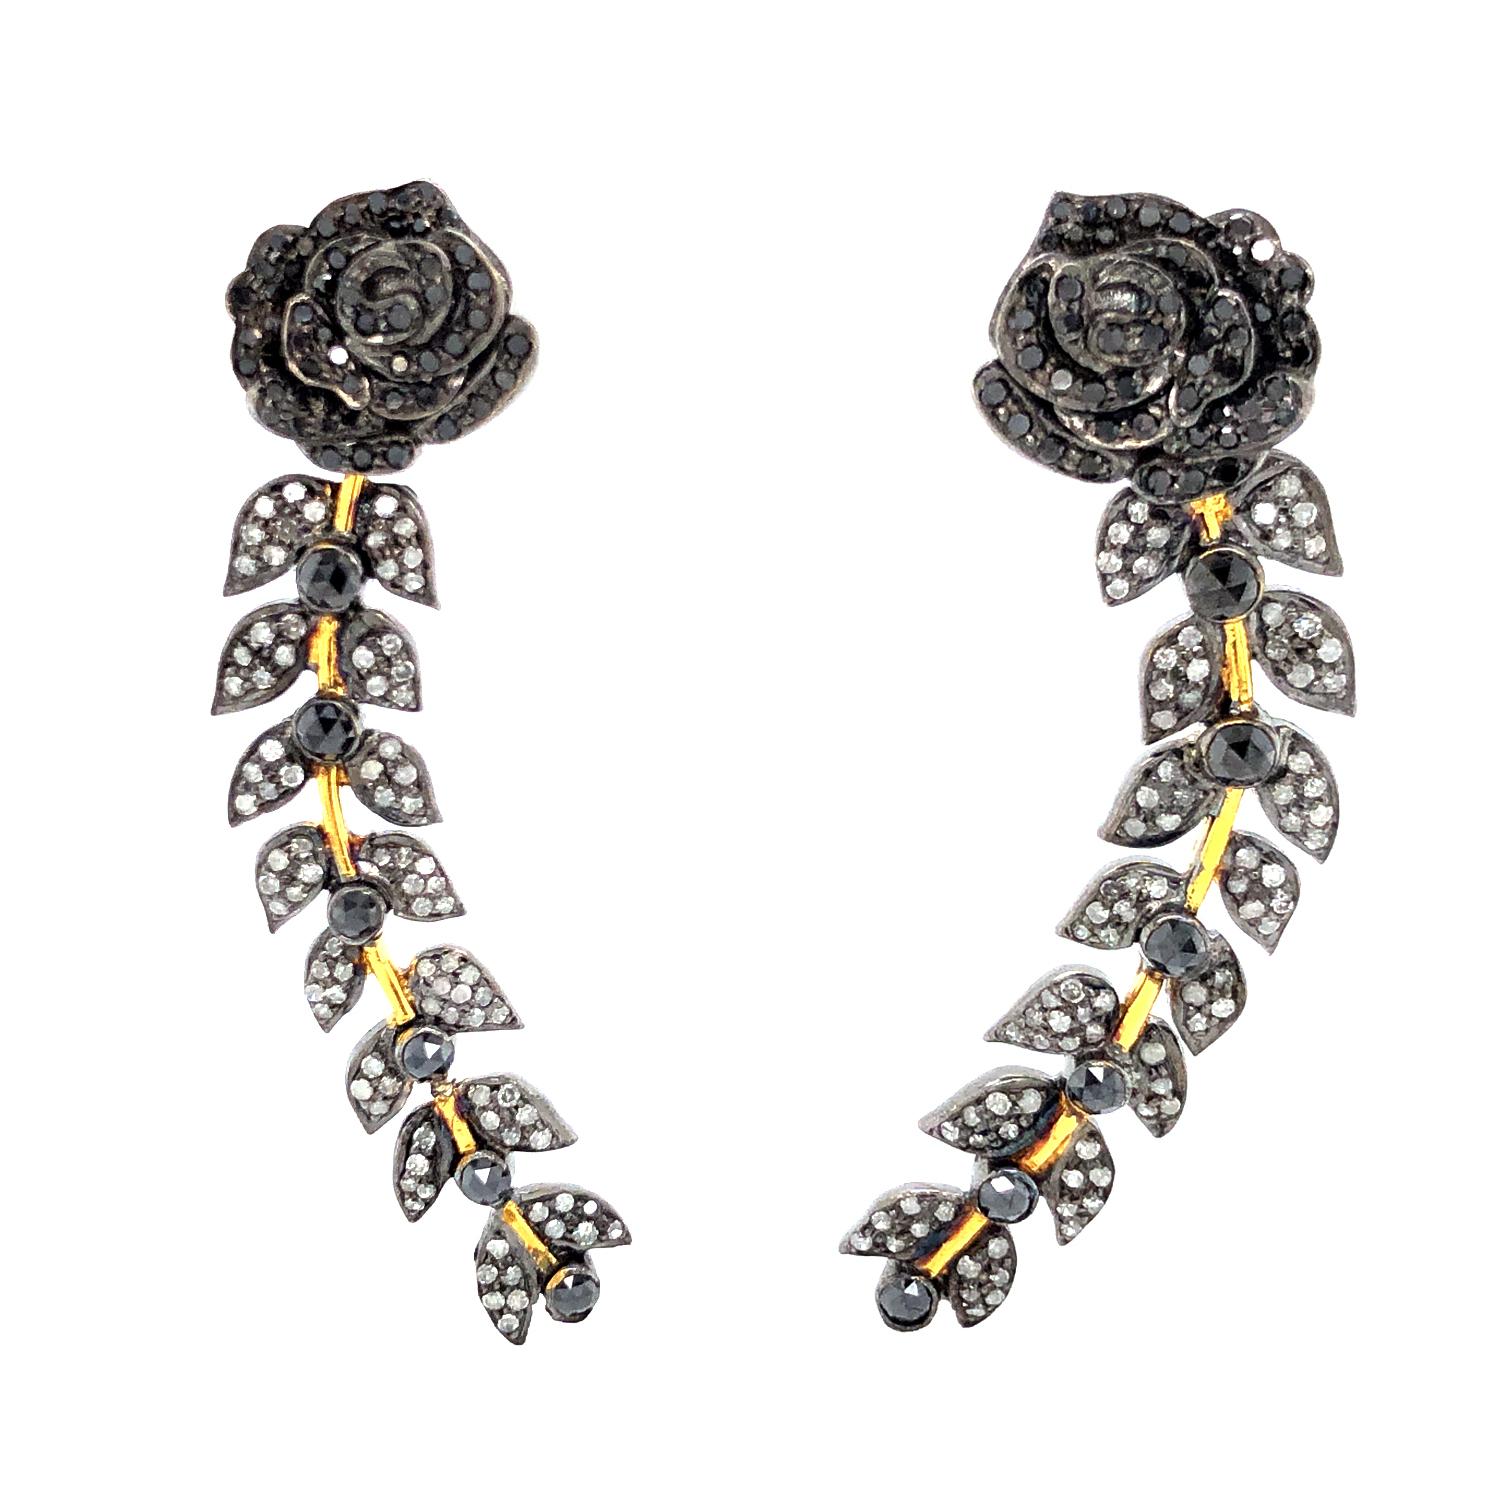 Women's Flower With Leaf Shaped Earrings With Diamonds Made In 18k Yellow Gold & Silver For Sale